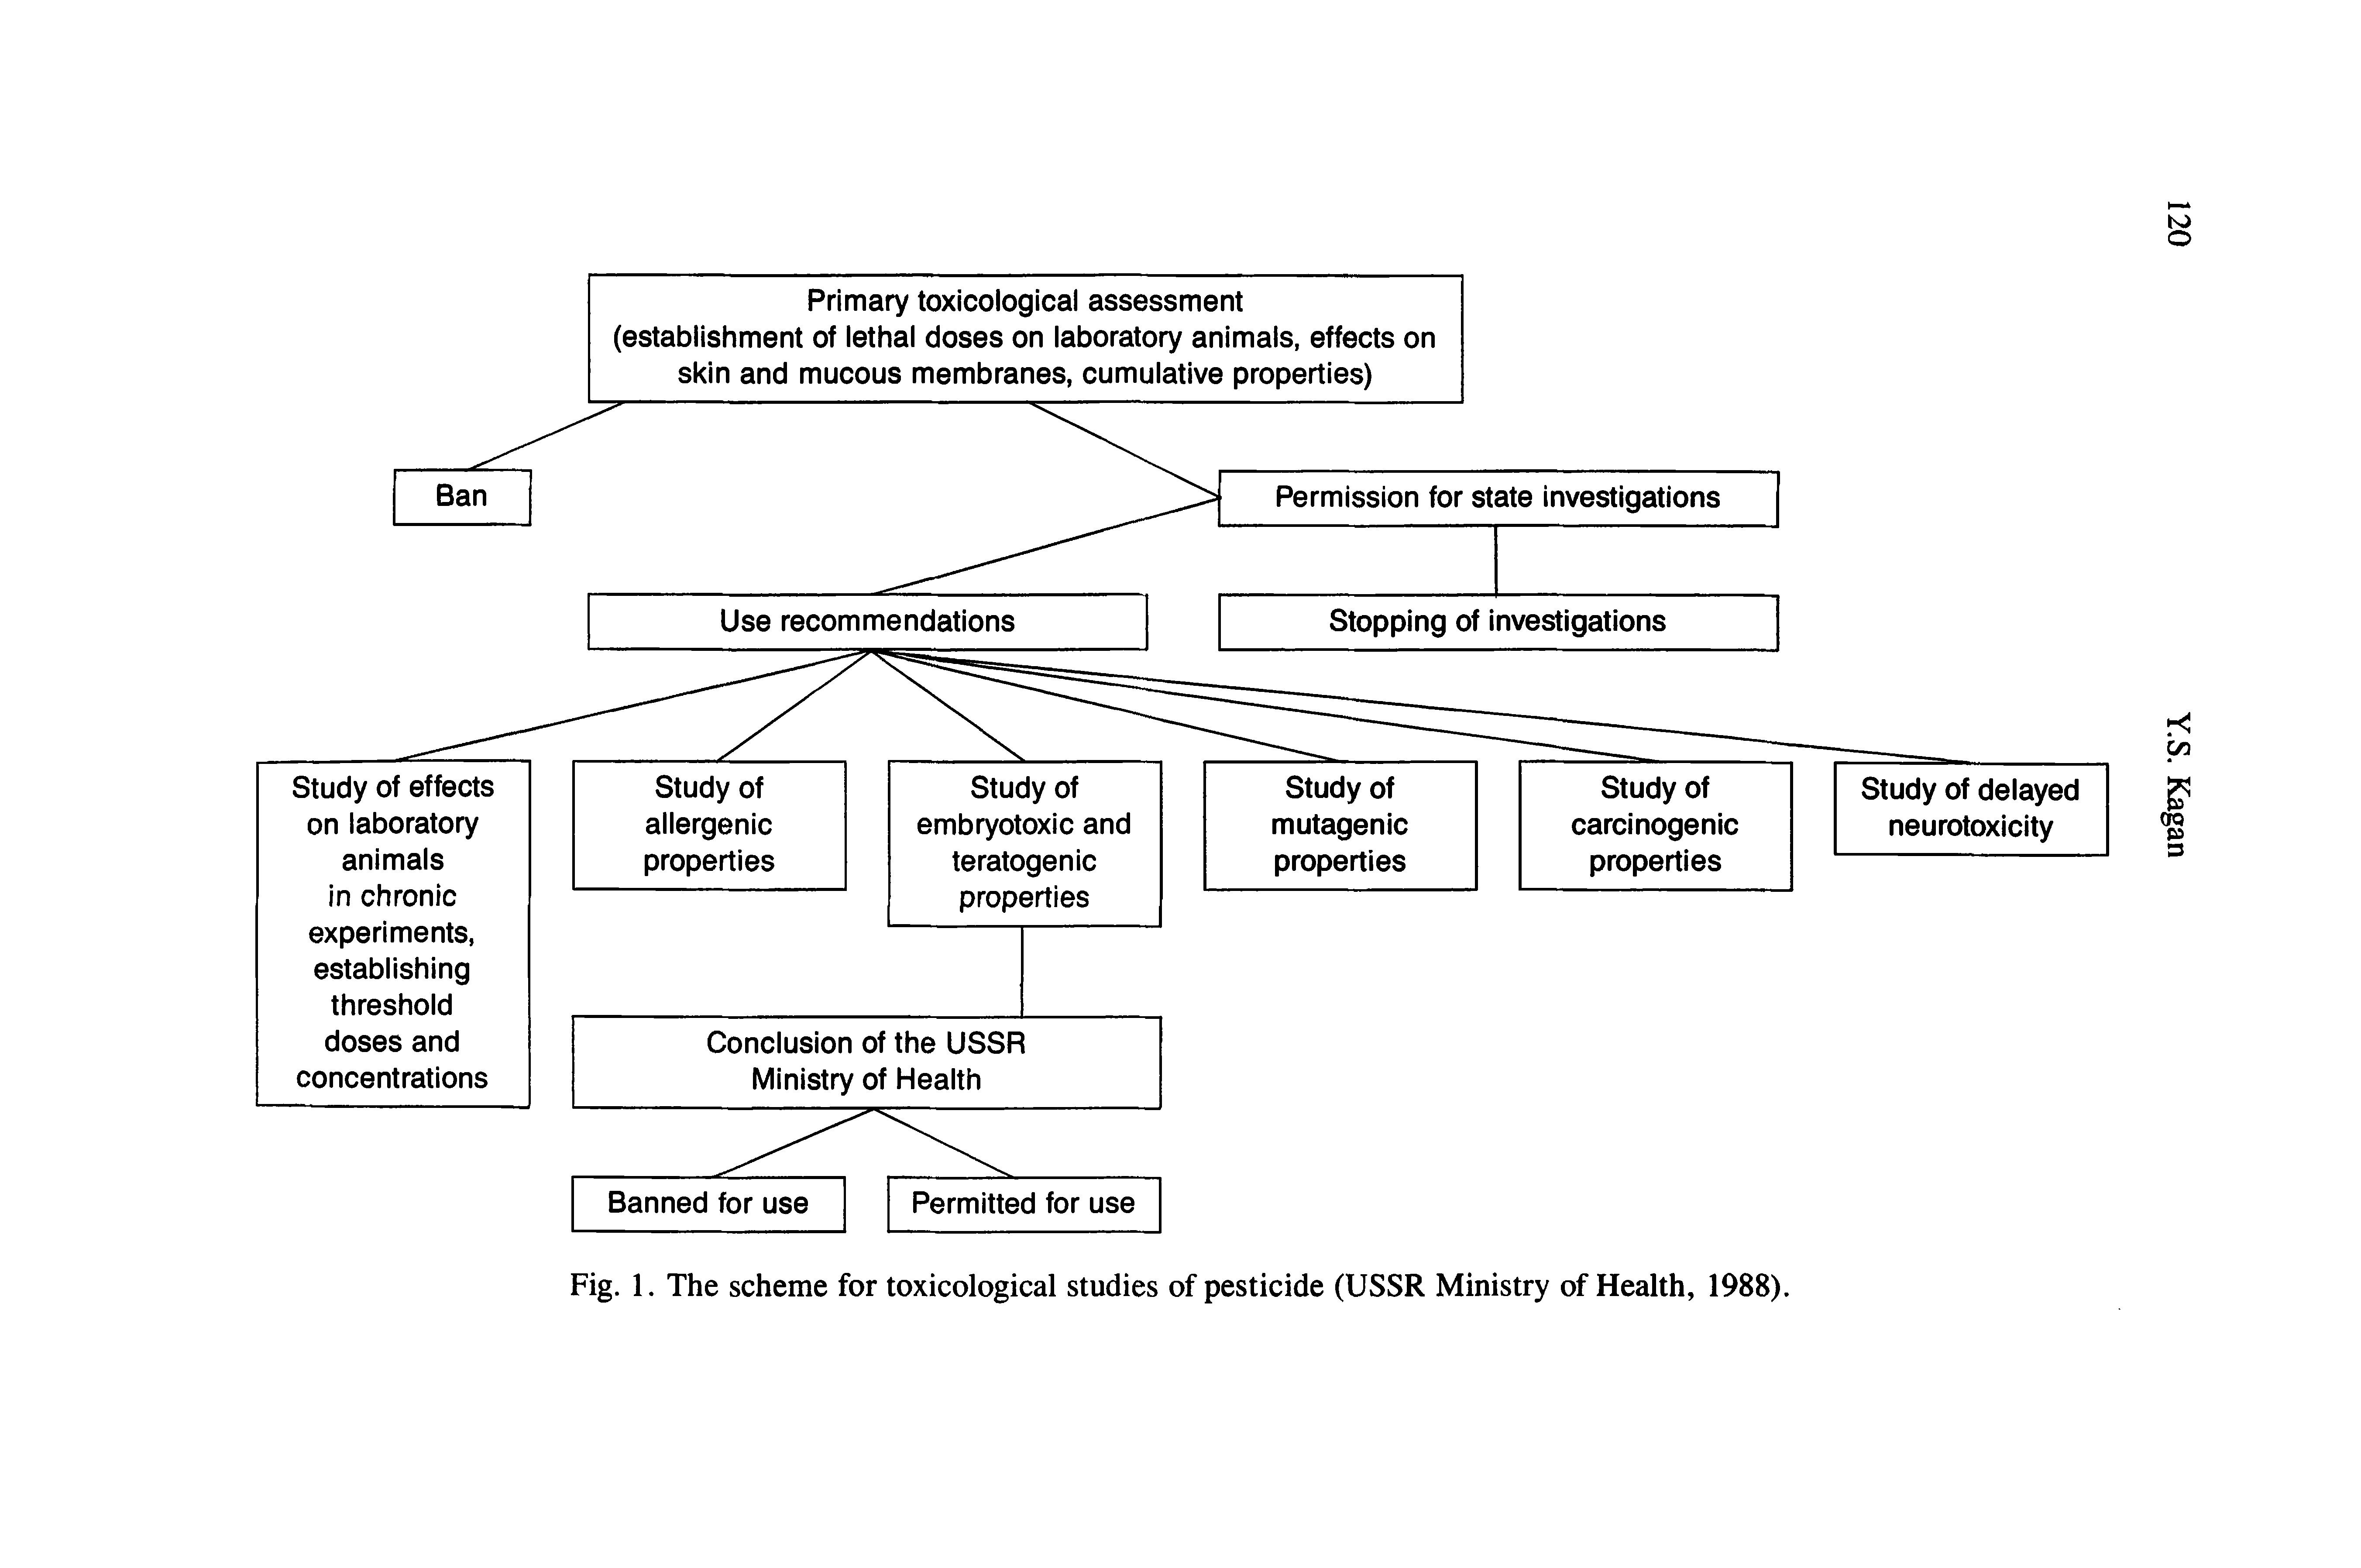 Fig. 1. The scheme for toxicological studies of pesticide (USSR Ministry of Health, 1988).